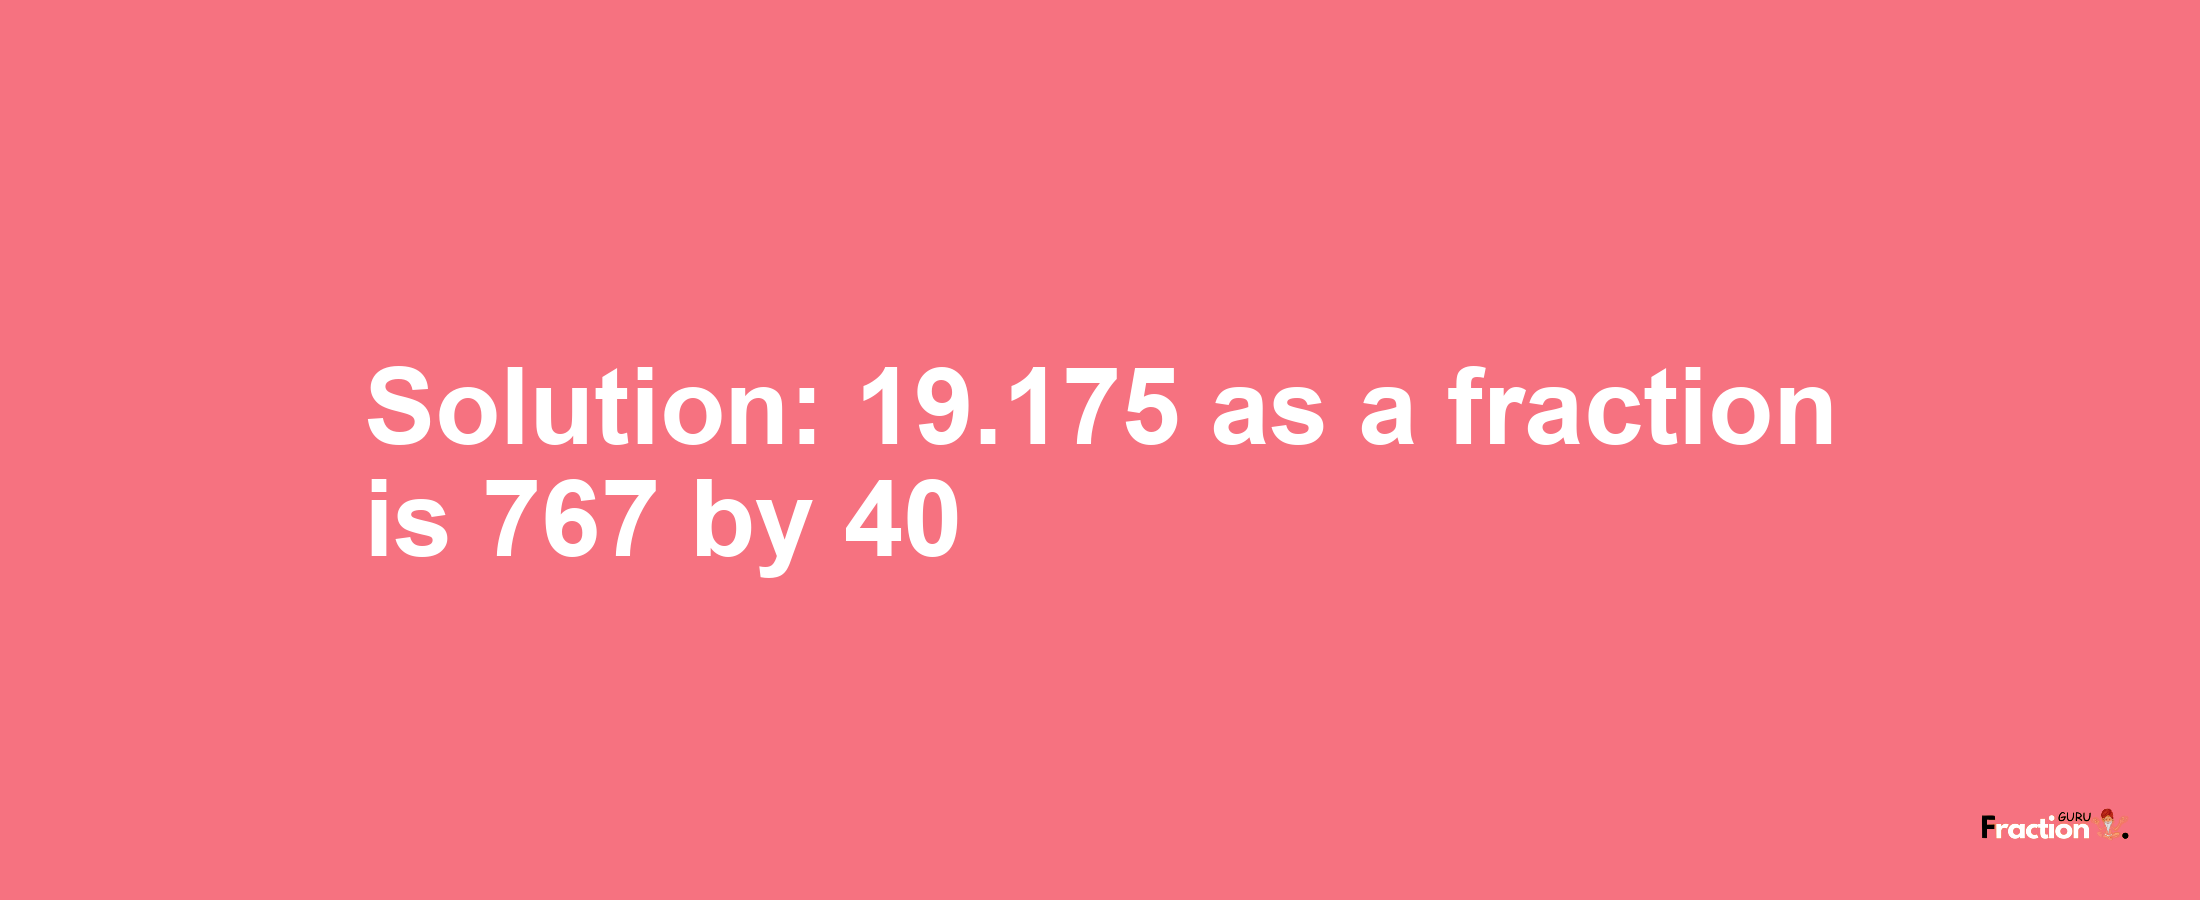 Solution:19.175 as a fraction is 767/40